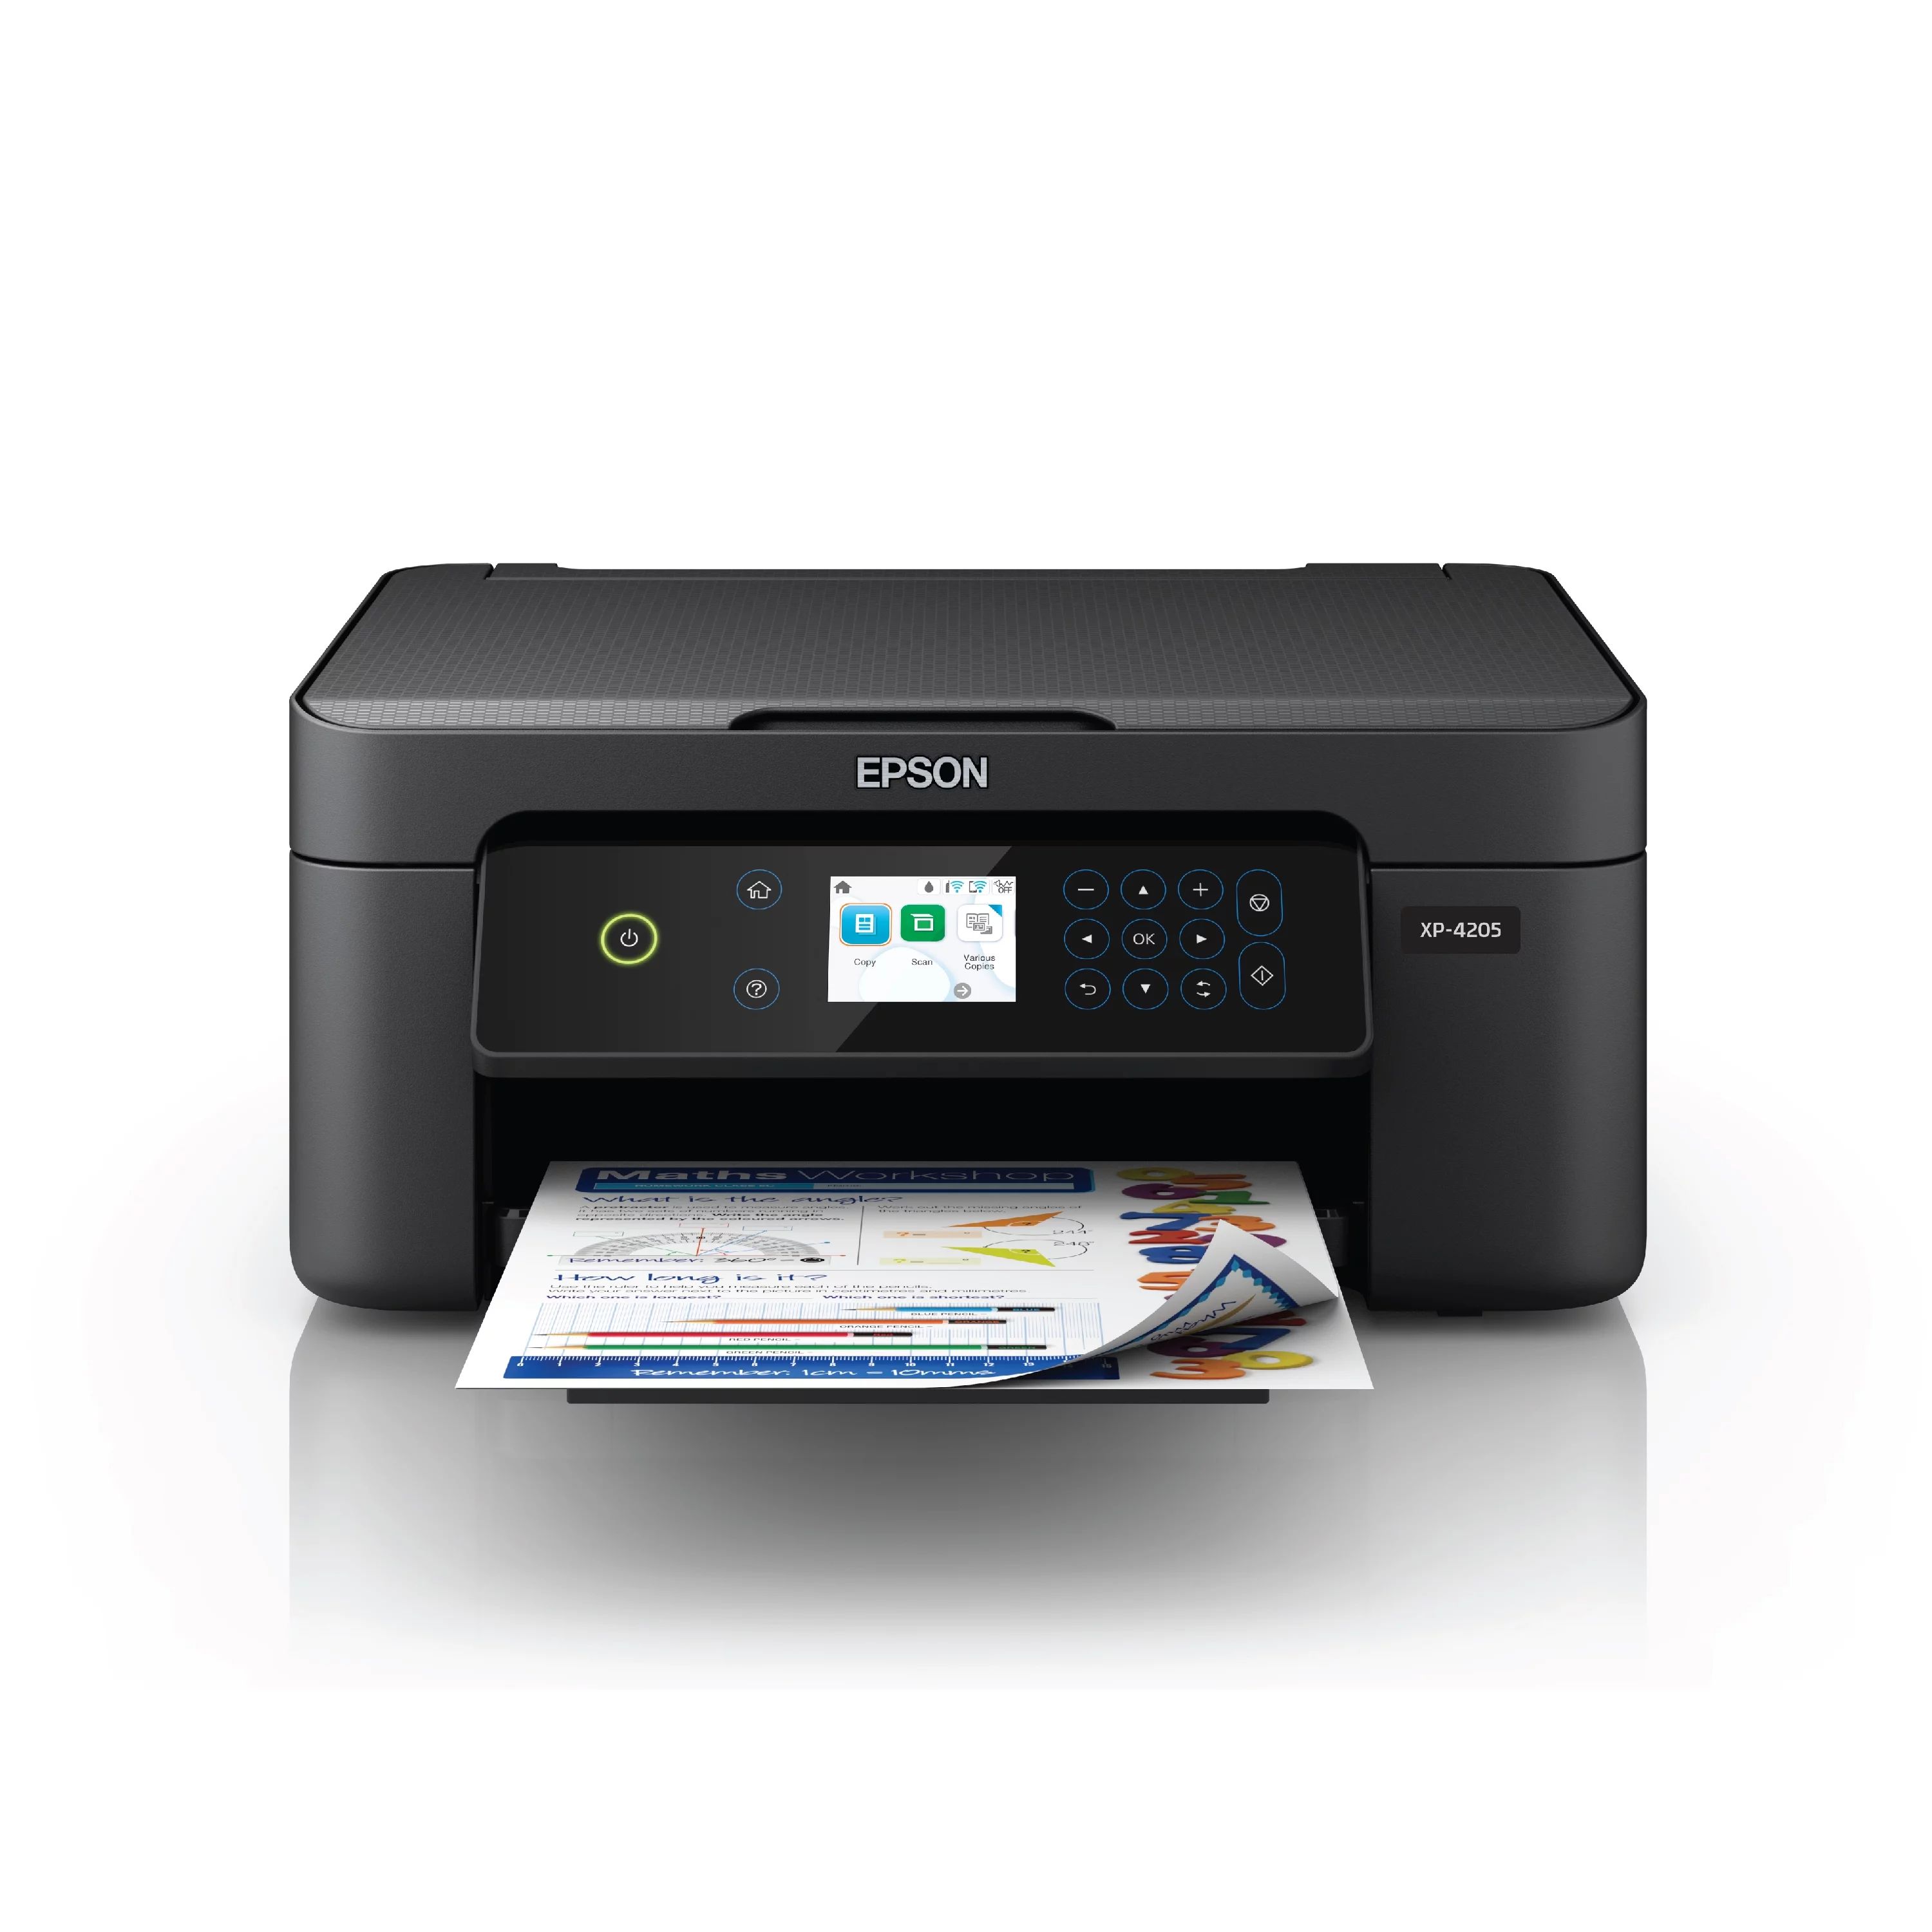 Epson Expression Home XP-4205 Wireless Color Printer with Scanner and Copier | Walmart (US)